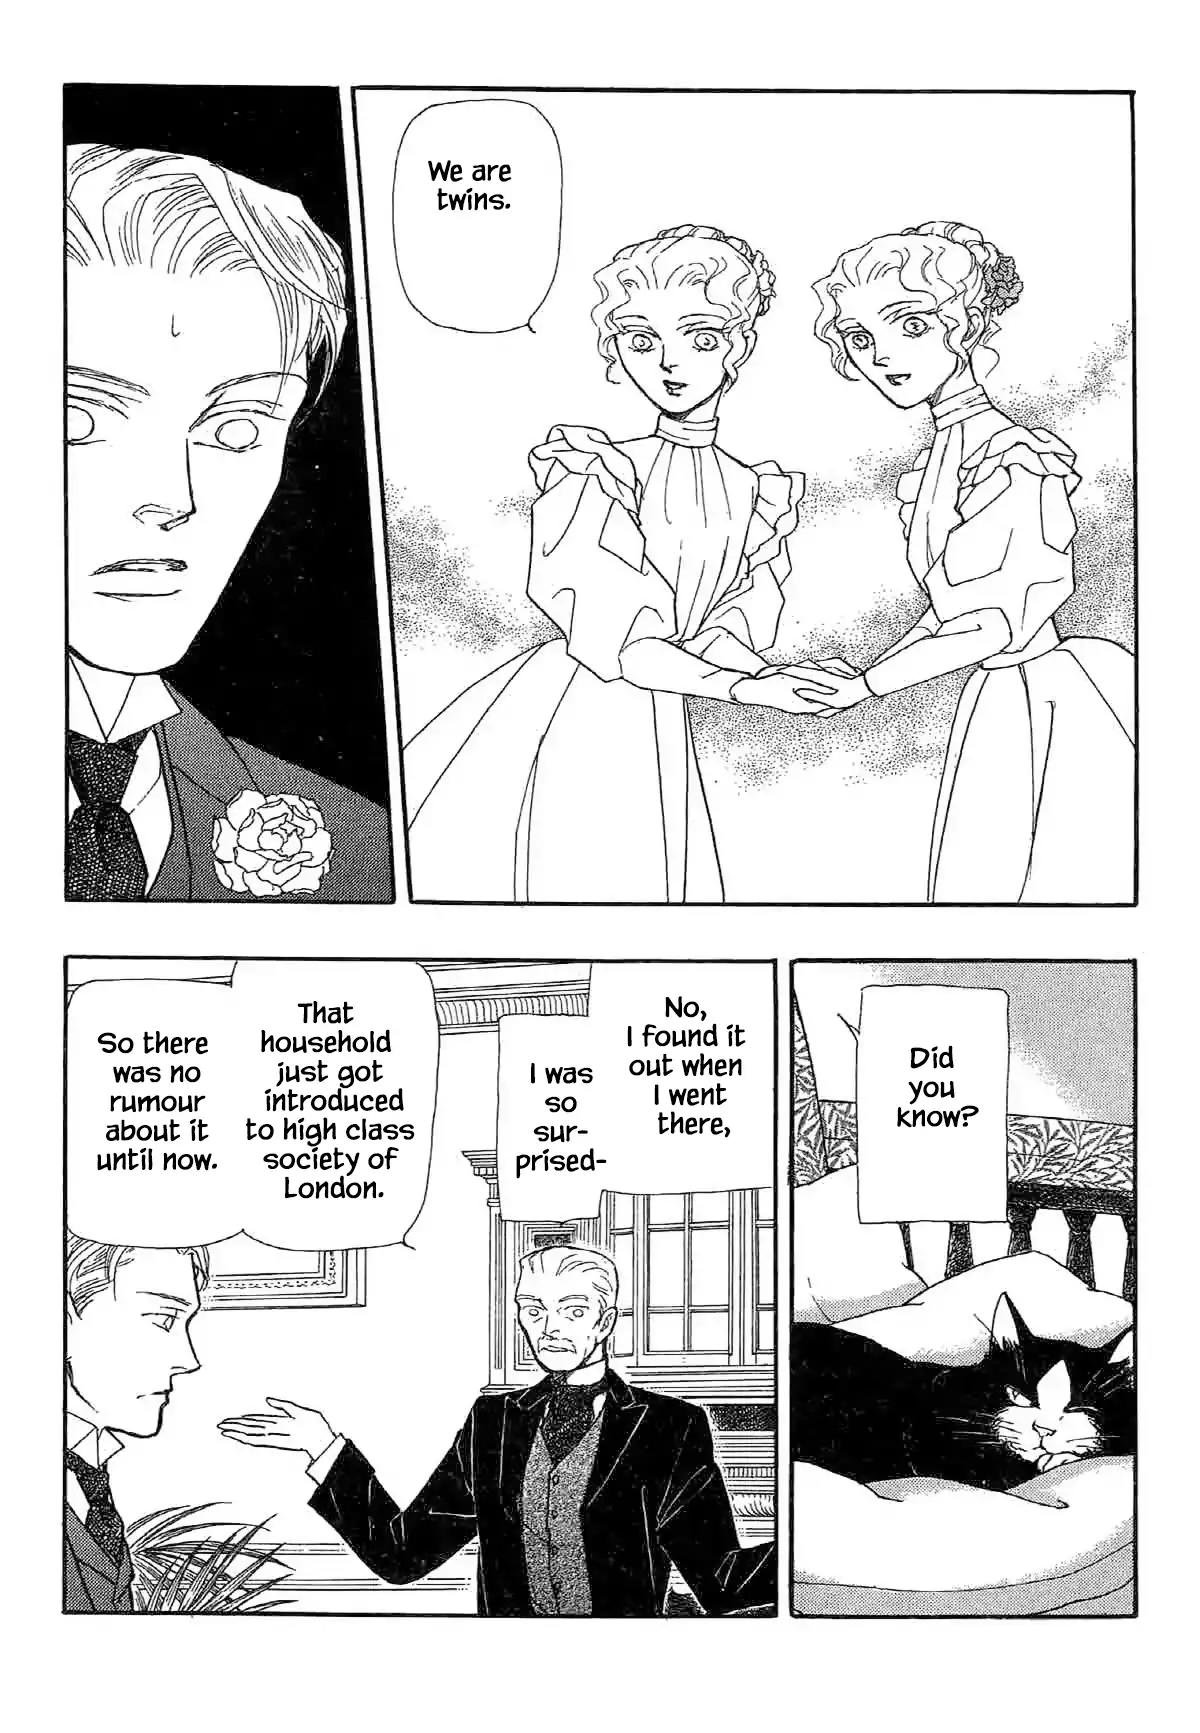 Beautiful England Series Vol.2 Chapter 10.1